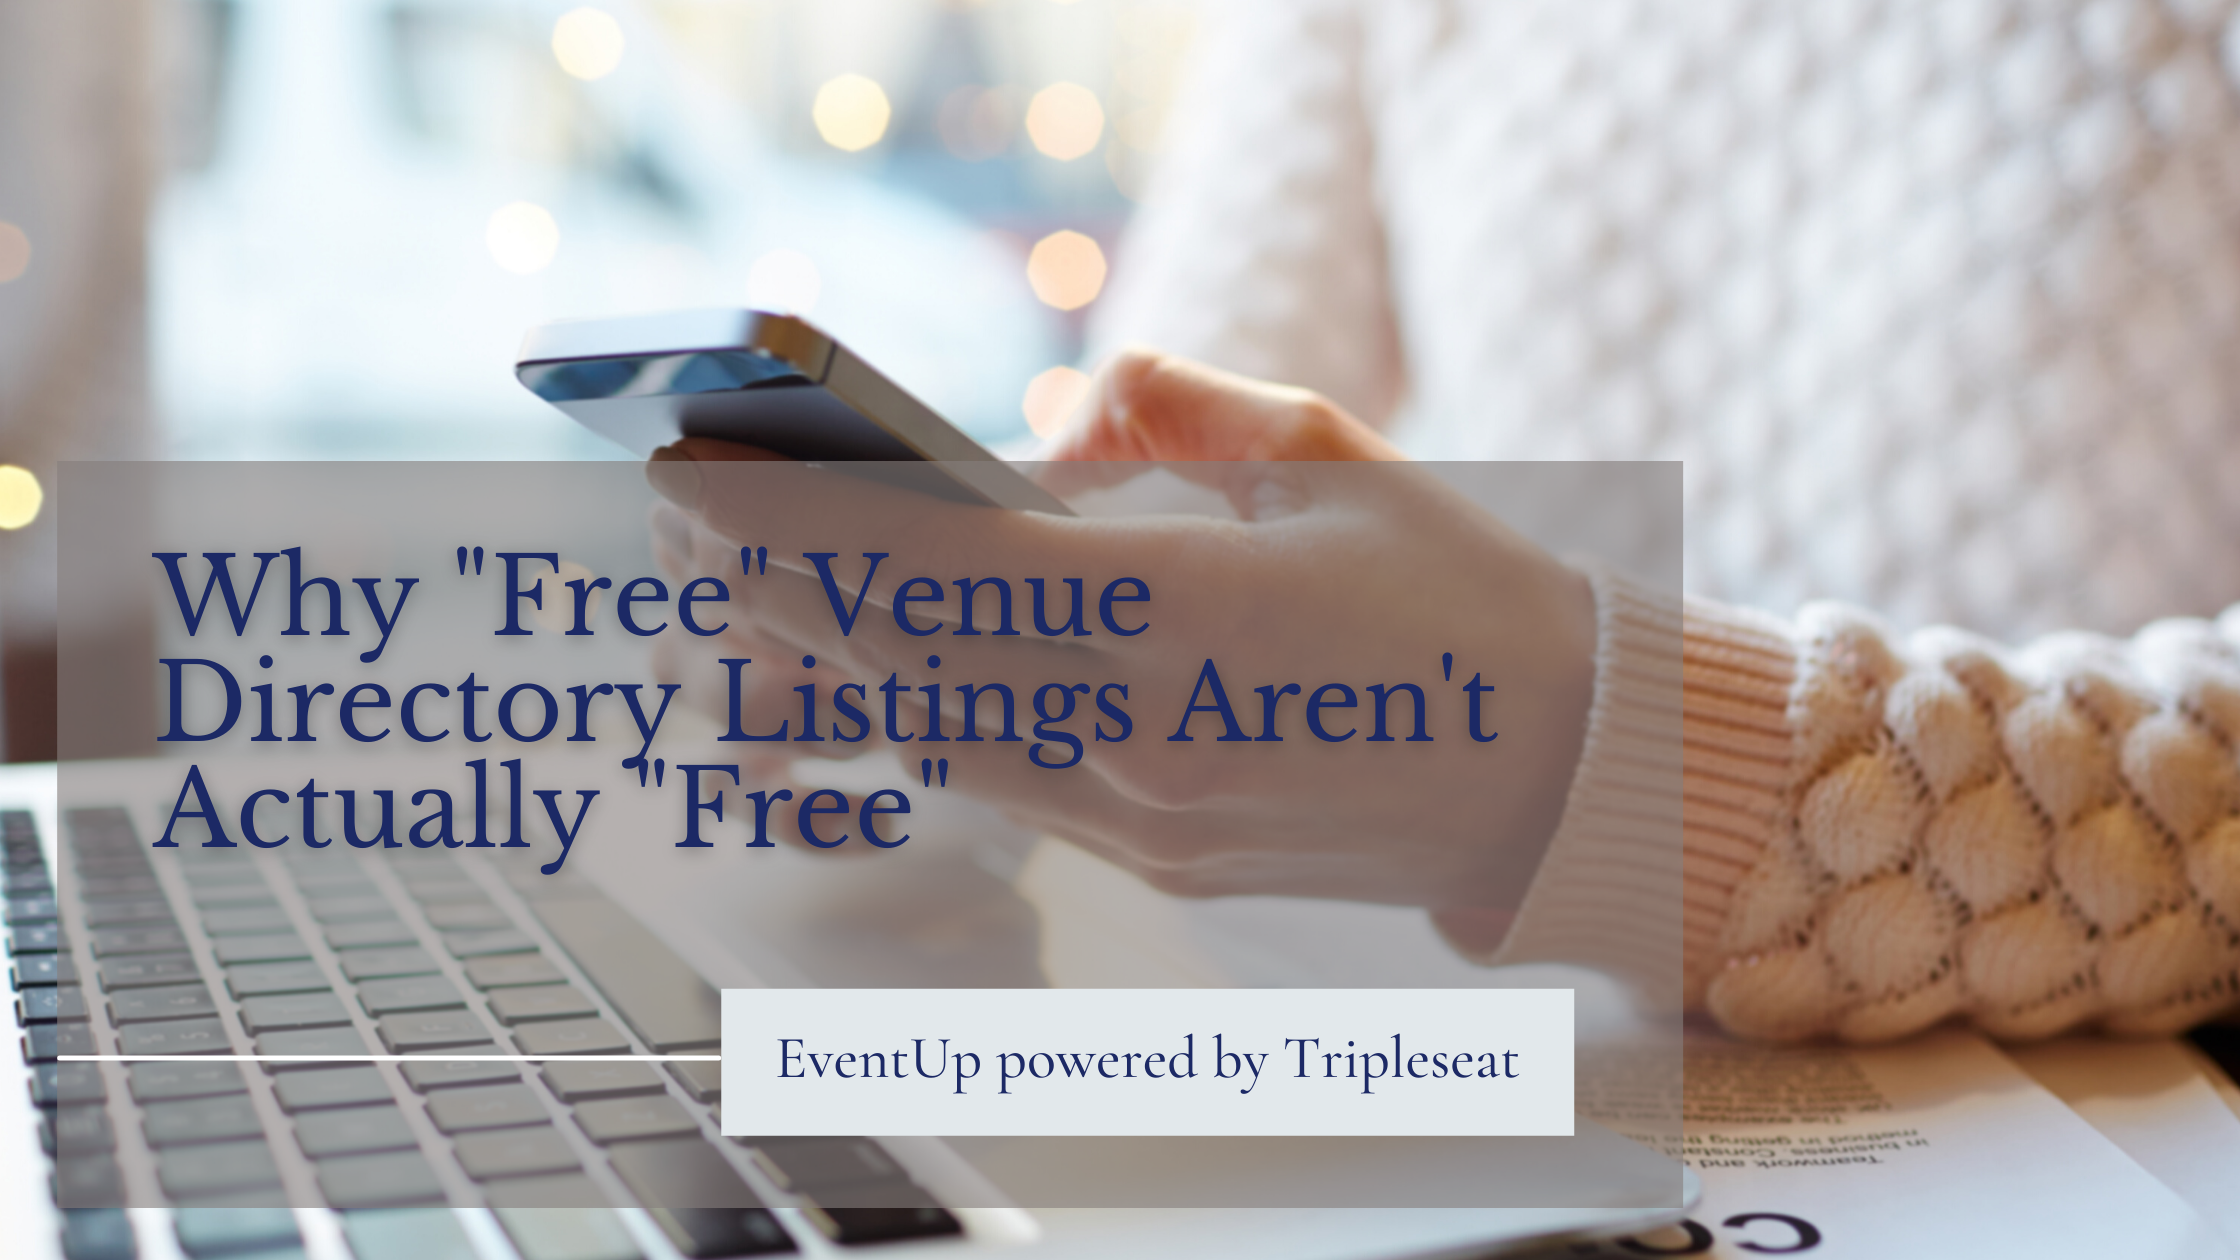 Why “Free” Venue Directory Listings Aren’t Actually “Free”